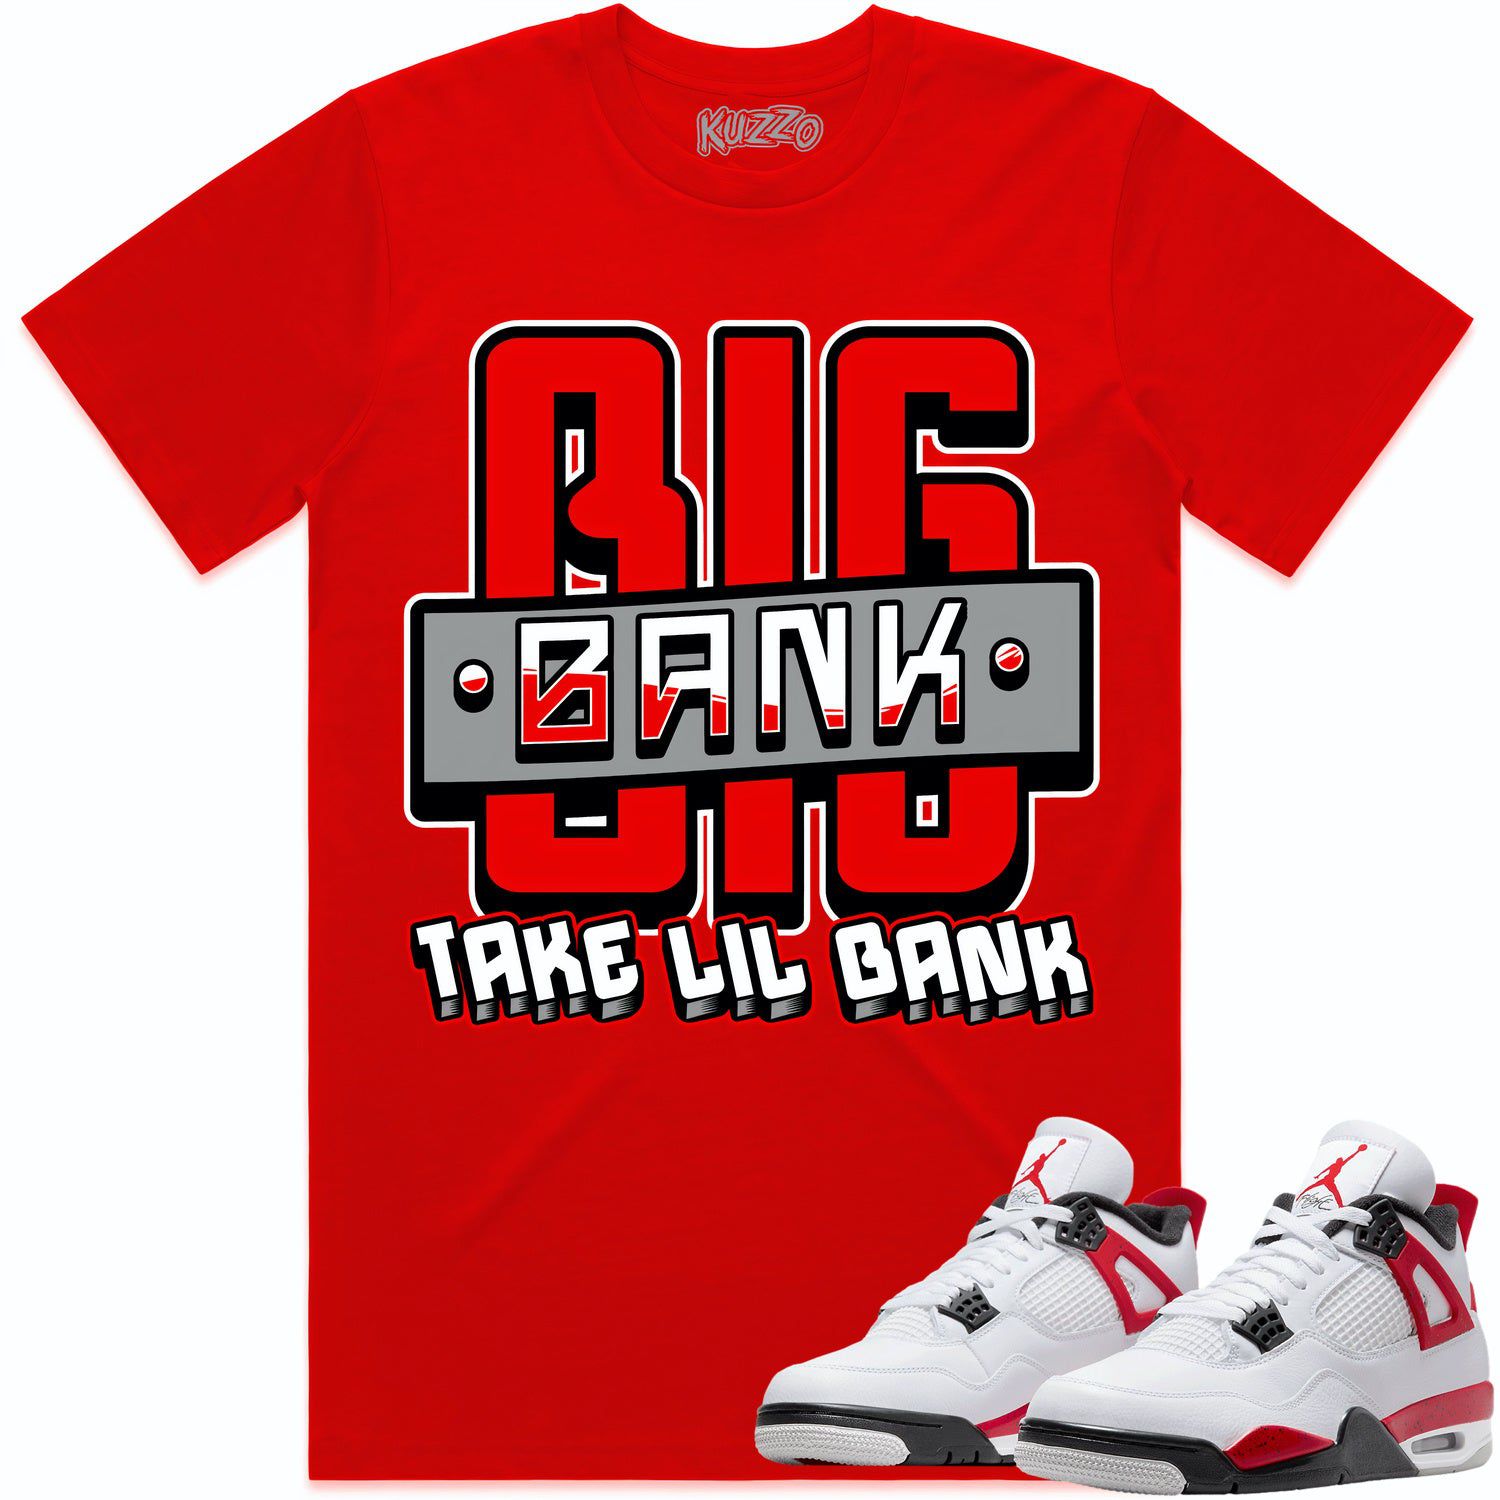 Red Cement 4s Shirt - Jordan Retro 4 Red Cement Shirts - Red Big Bank